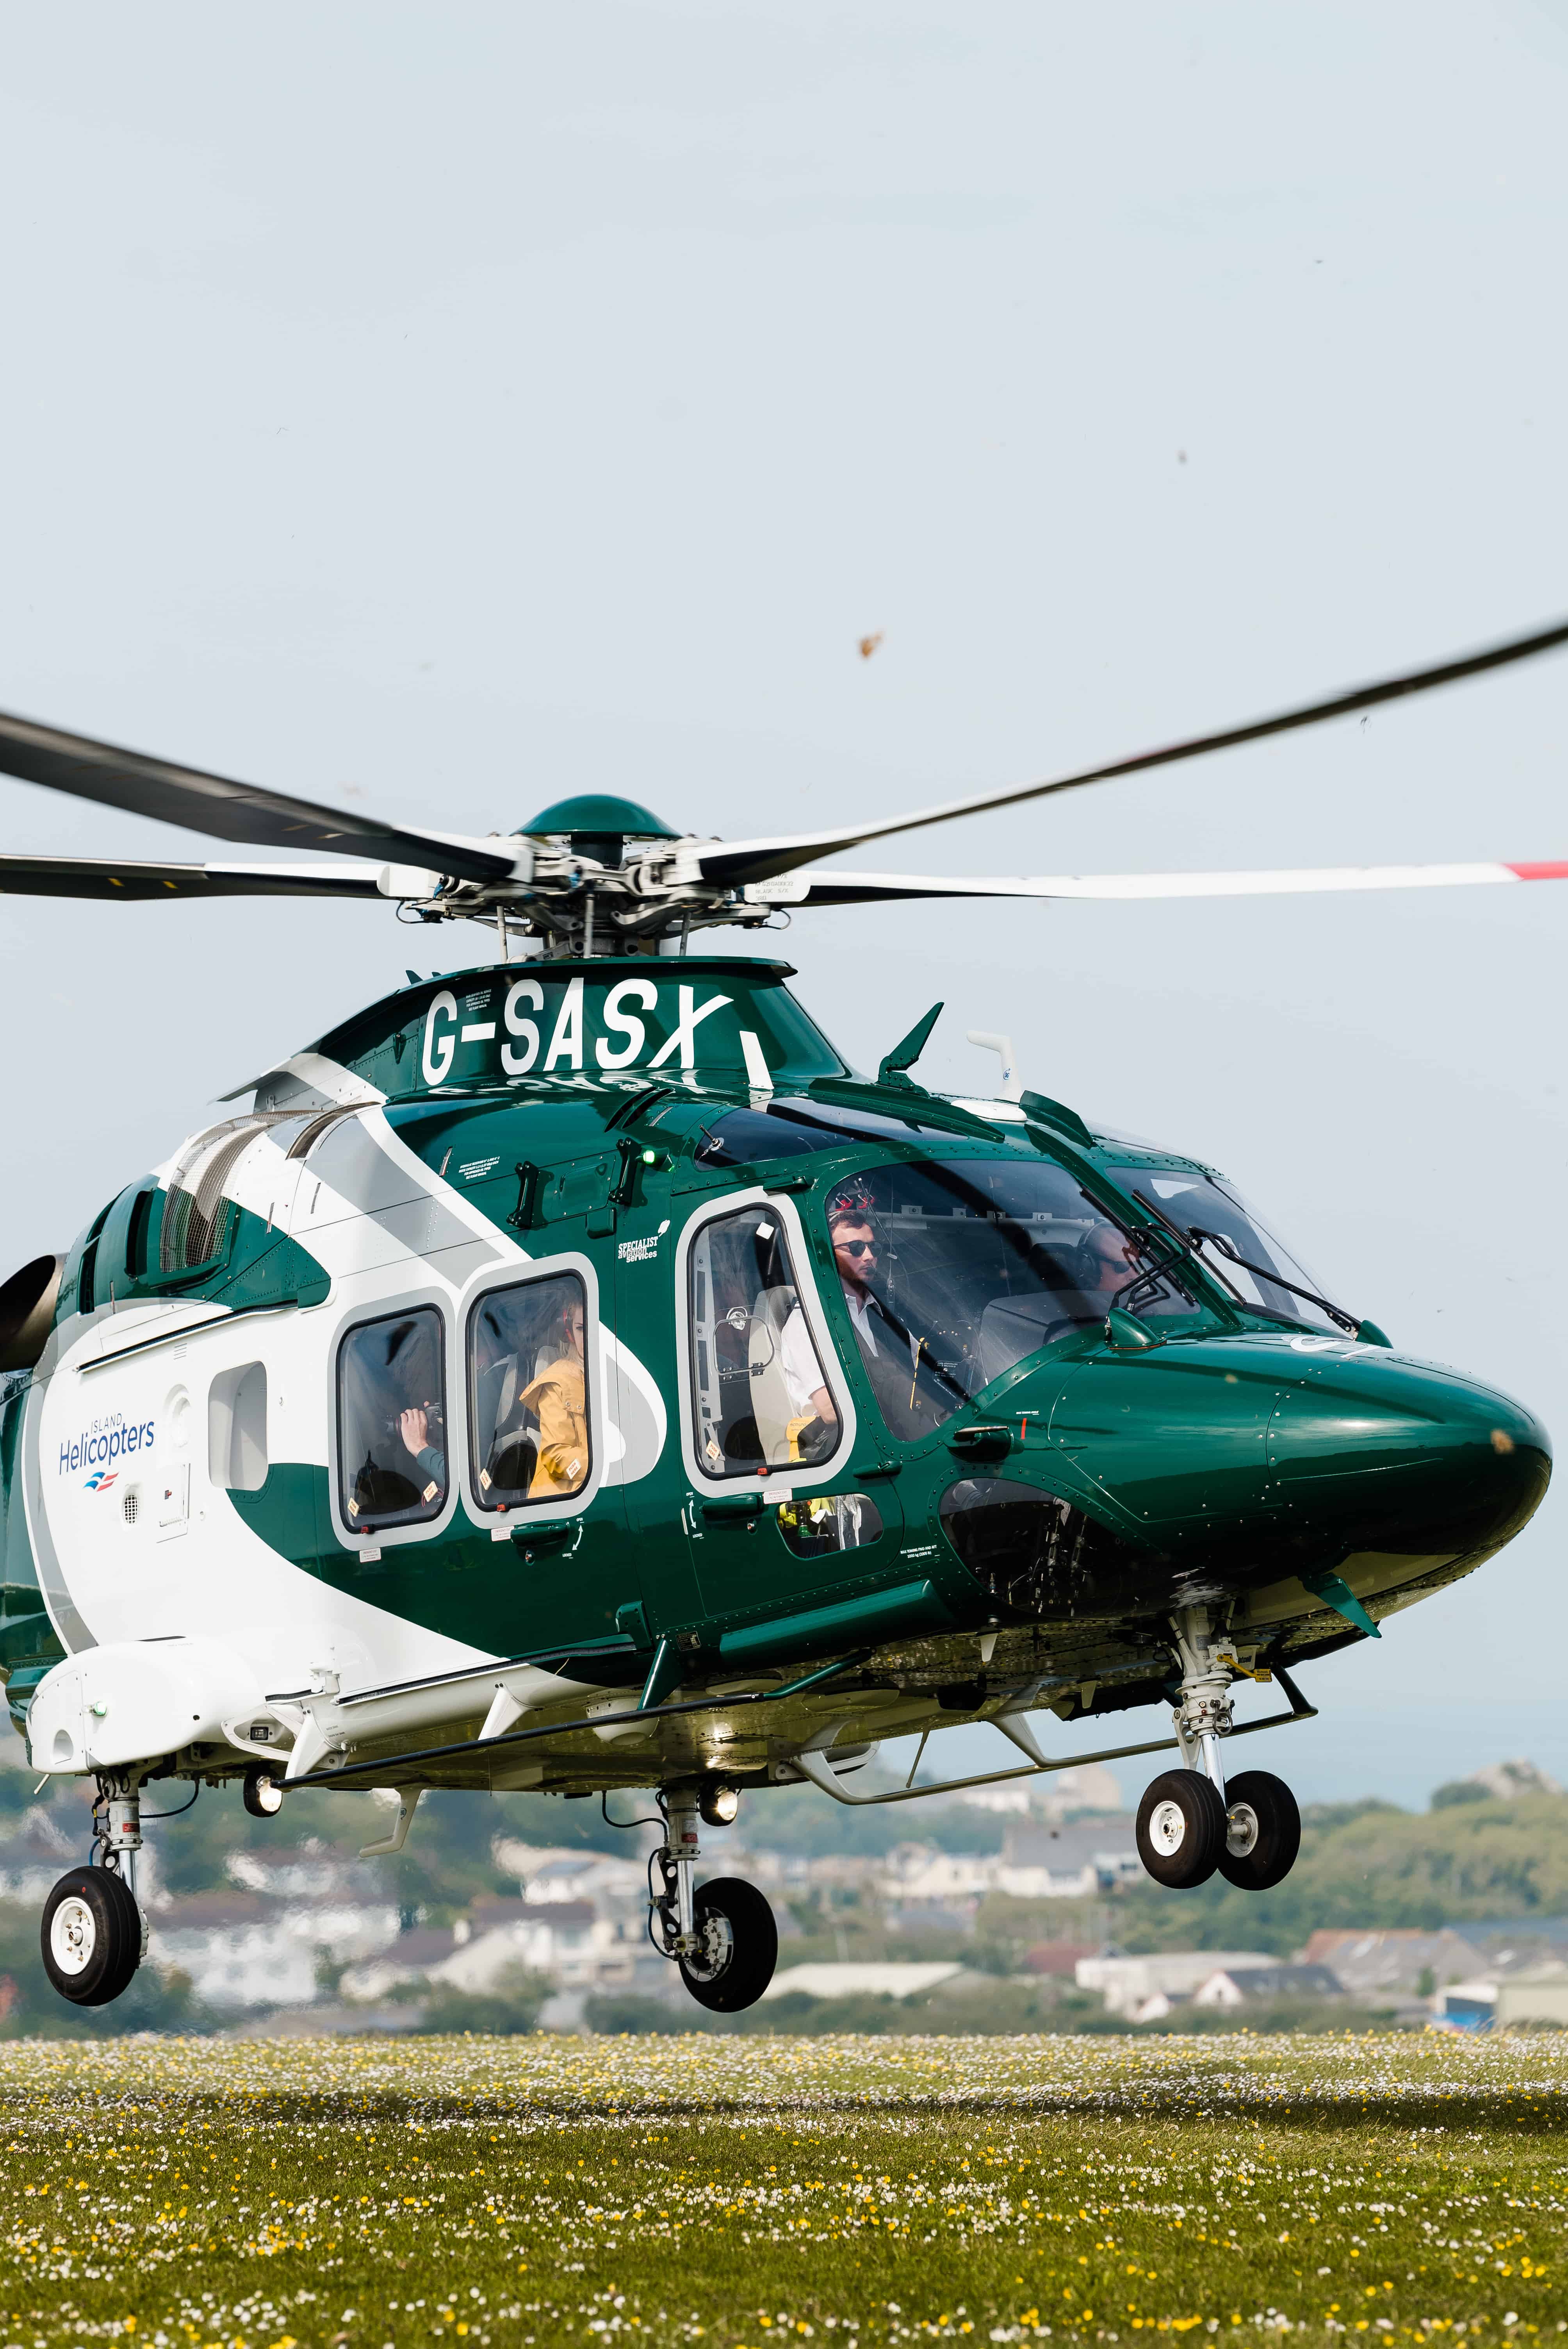 isles of scilly travel helicopter